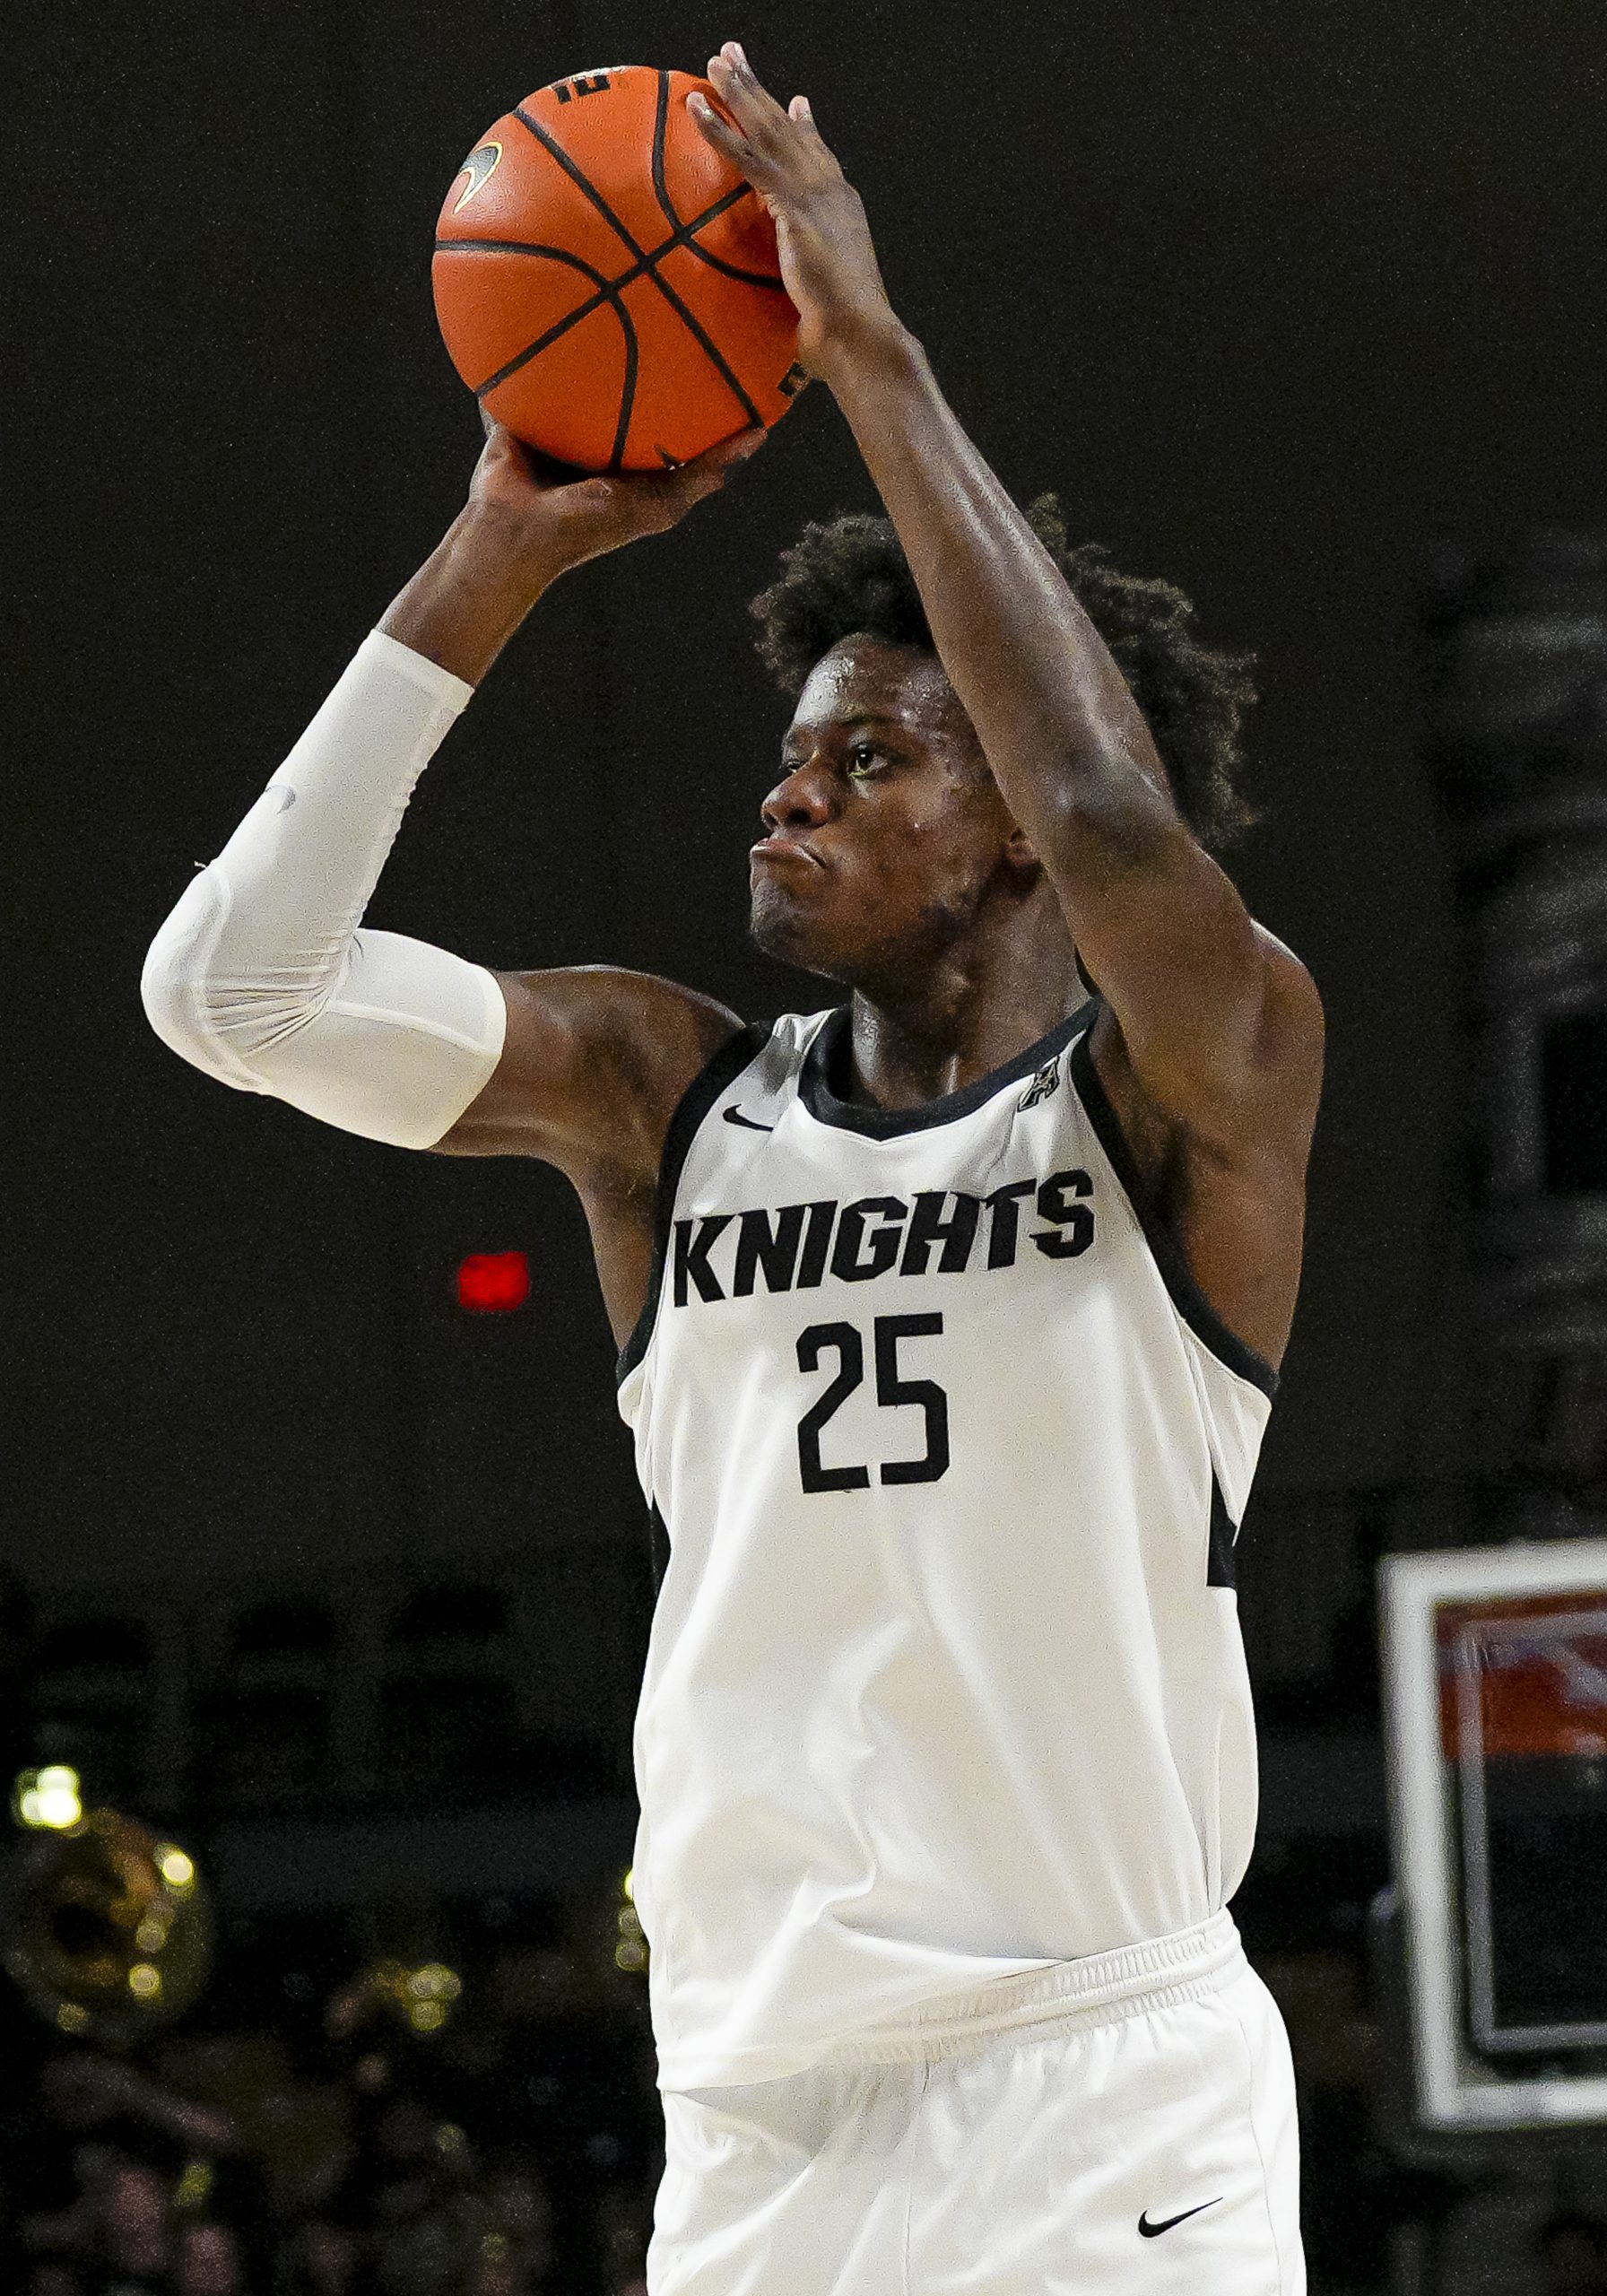 UCF’s Taylor Hendricks is Putting Everyone on Notice as a Projected First-Round 2023 NBA Draft Pick